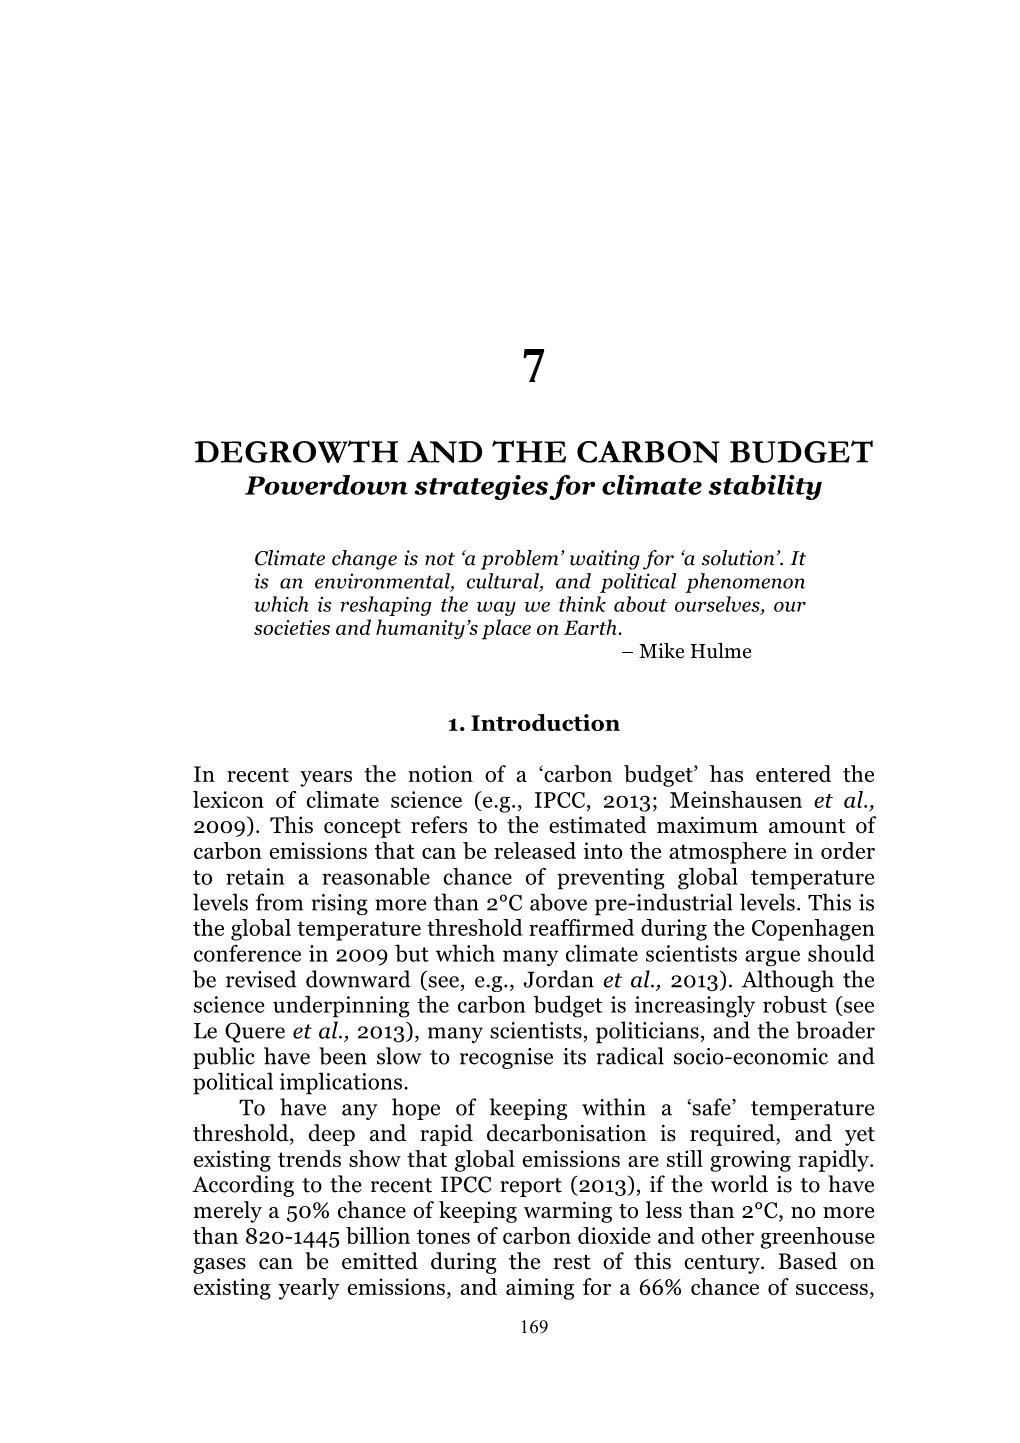 Degrowth and the Carbon Budget (Samuel Alexander)